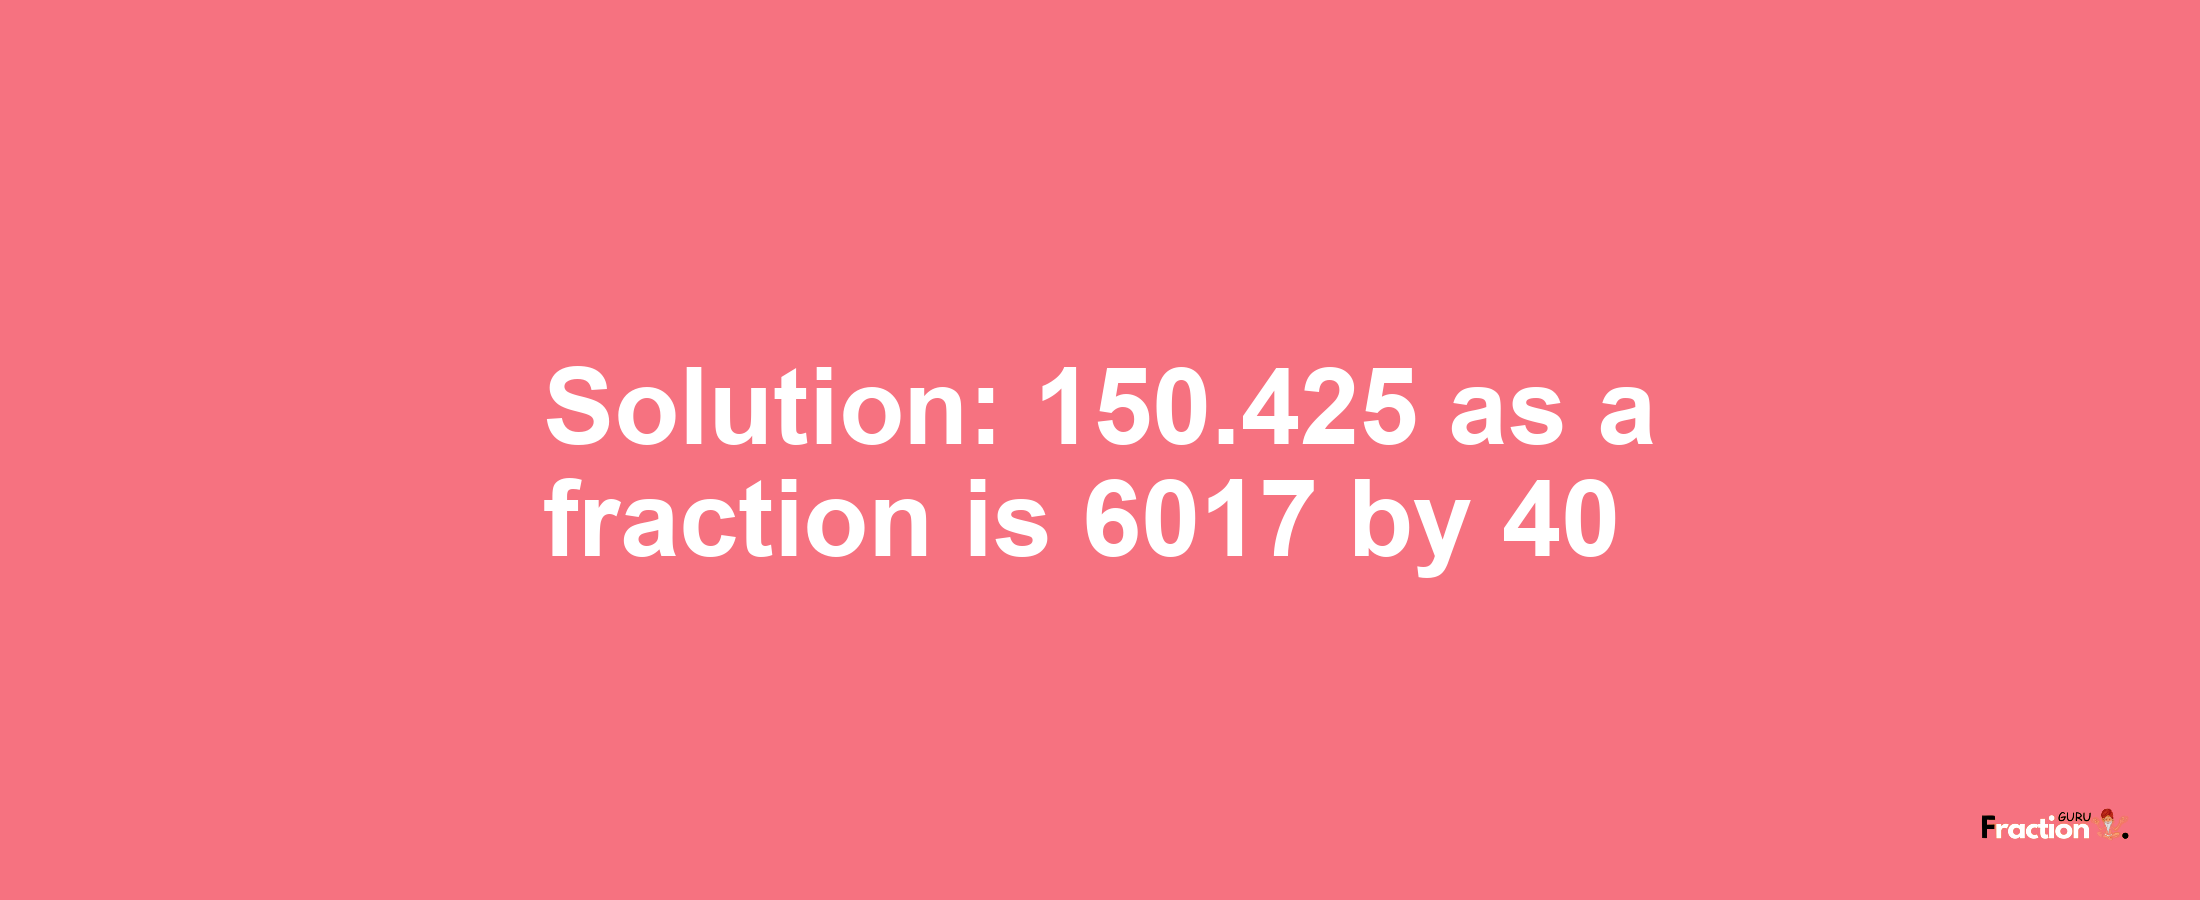 Solution:150.425 as a fraction is 6017/40